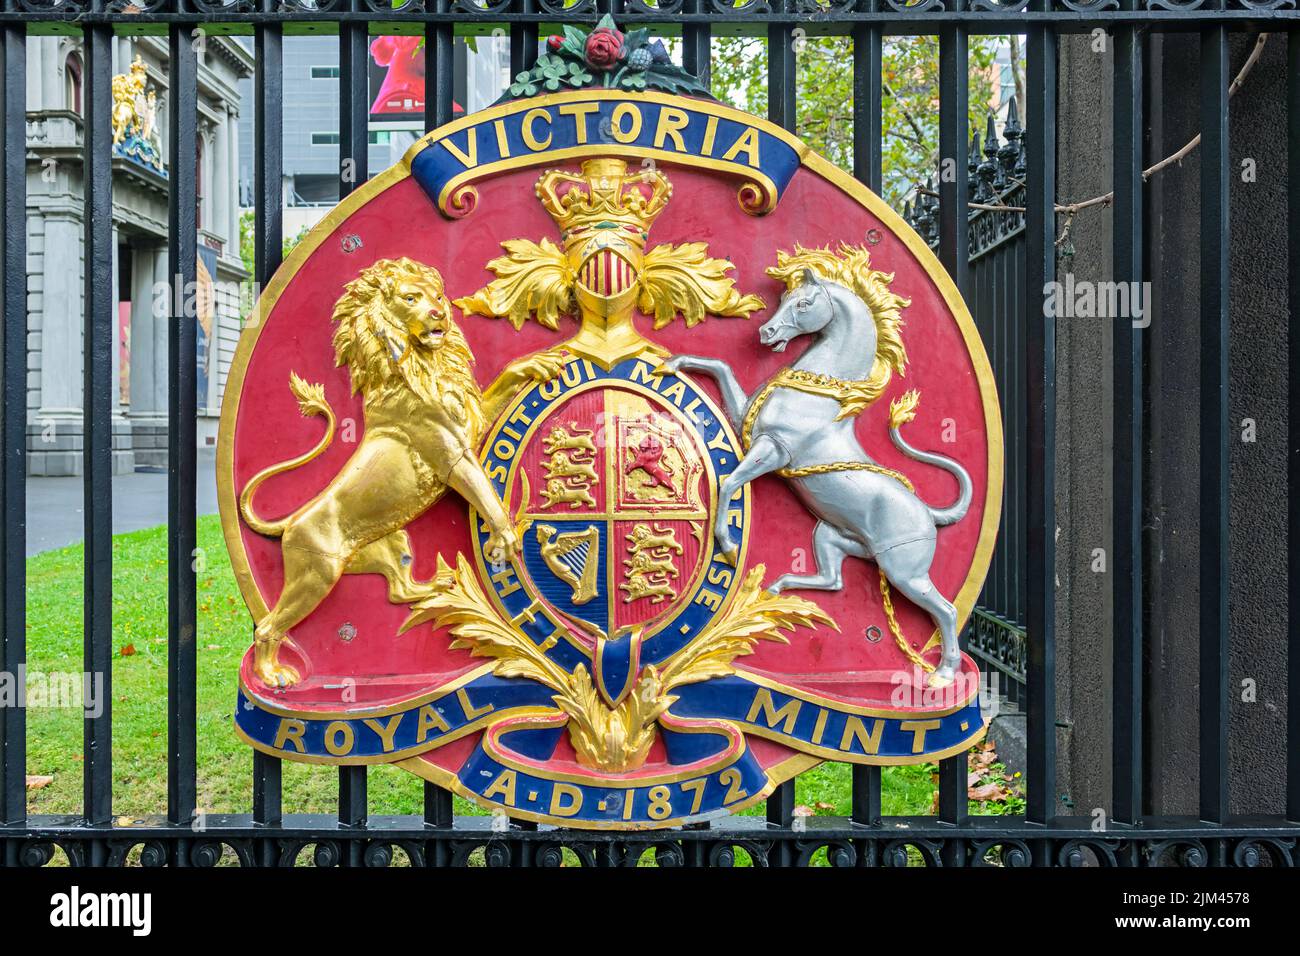 The historic coat of arms of the Royal Mint at the historic Melbourne Mint building in downtown Melbourne, Victoria, Australia. Stock Photo